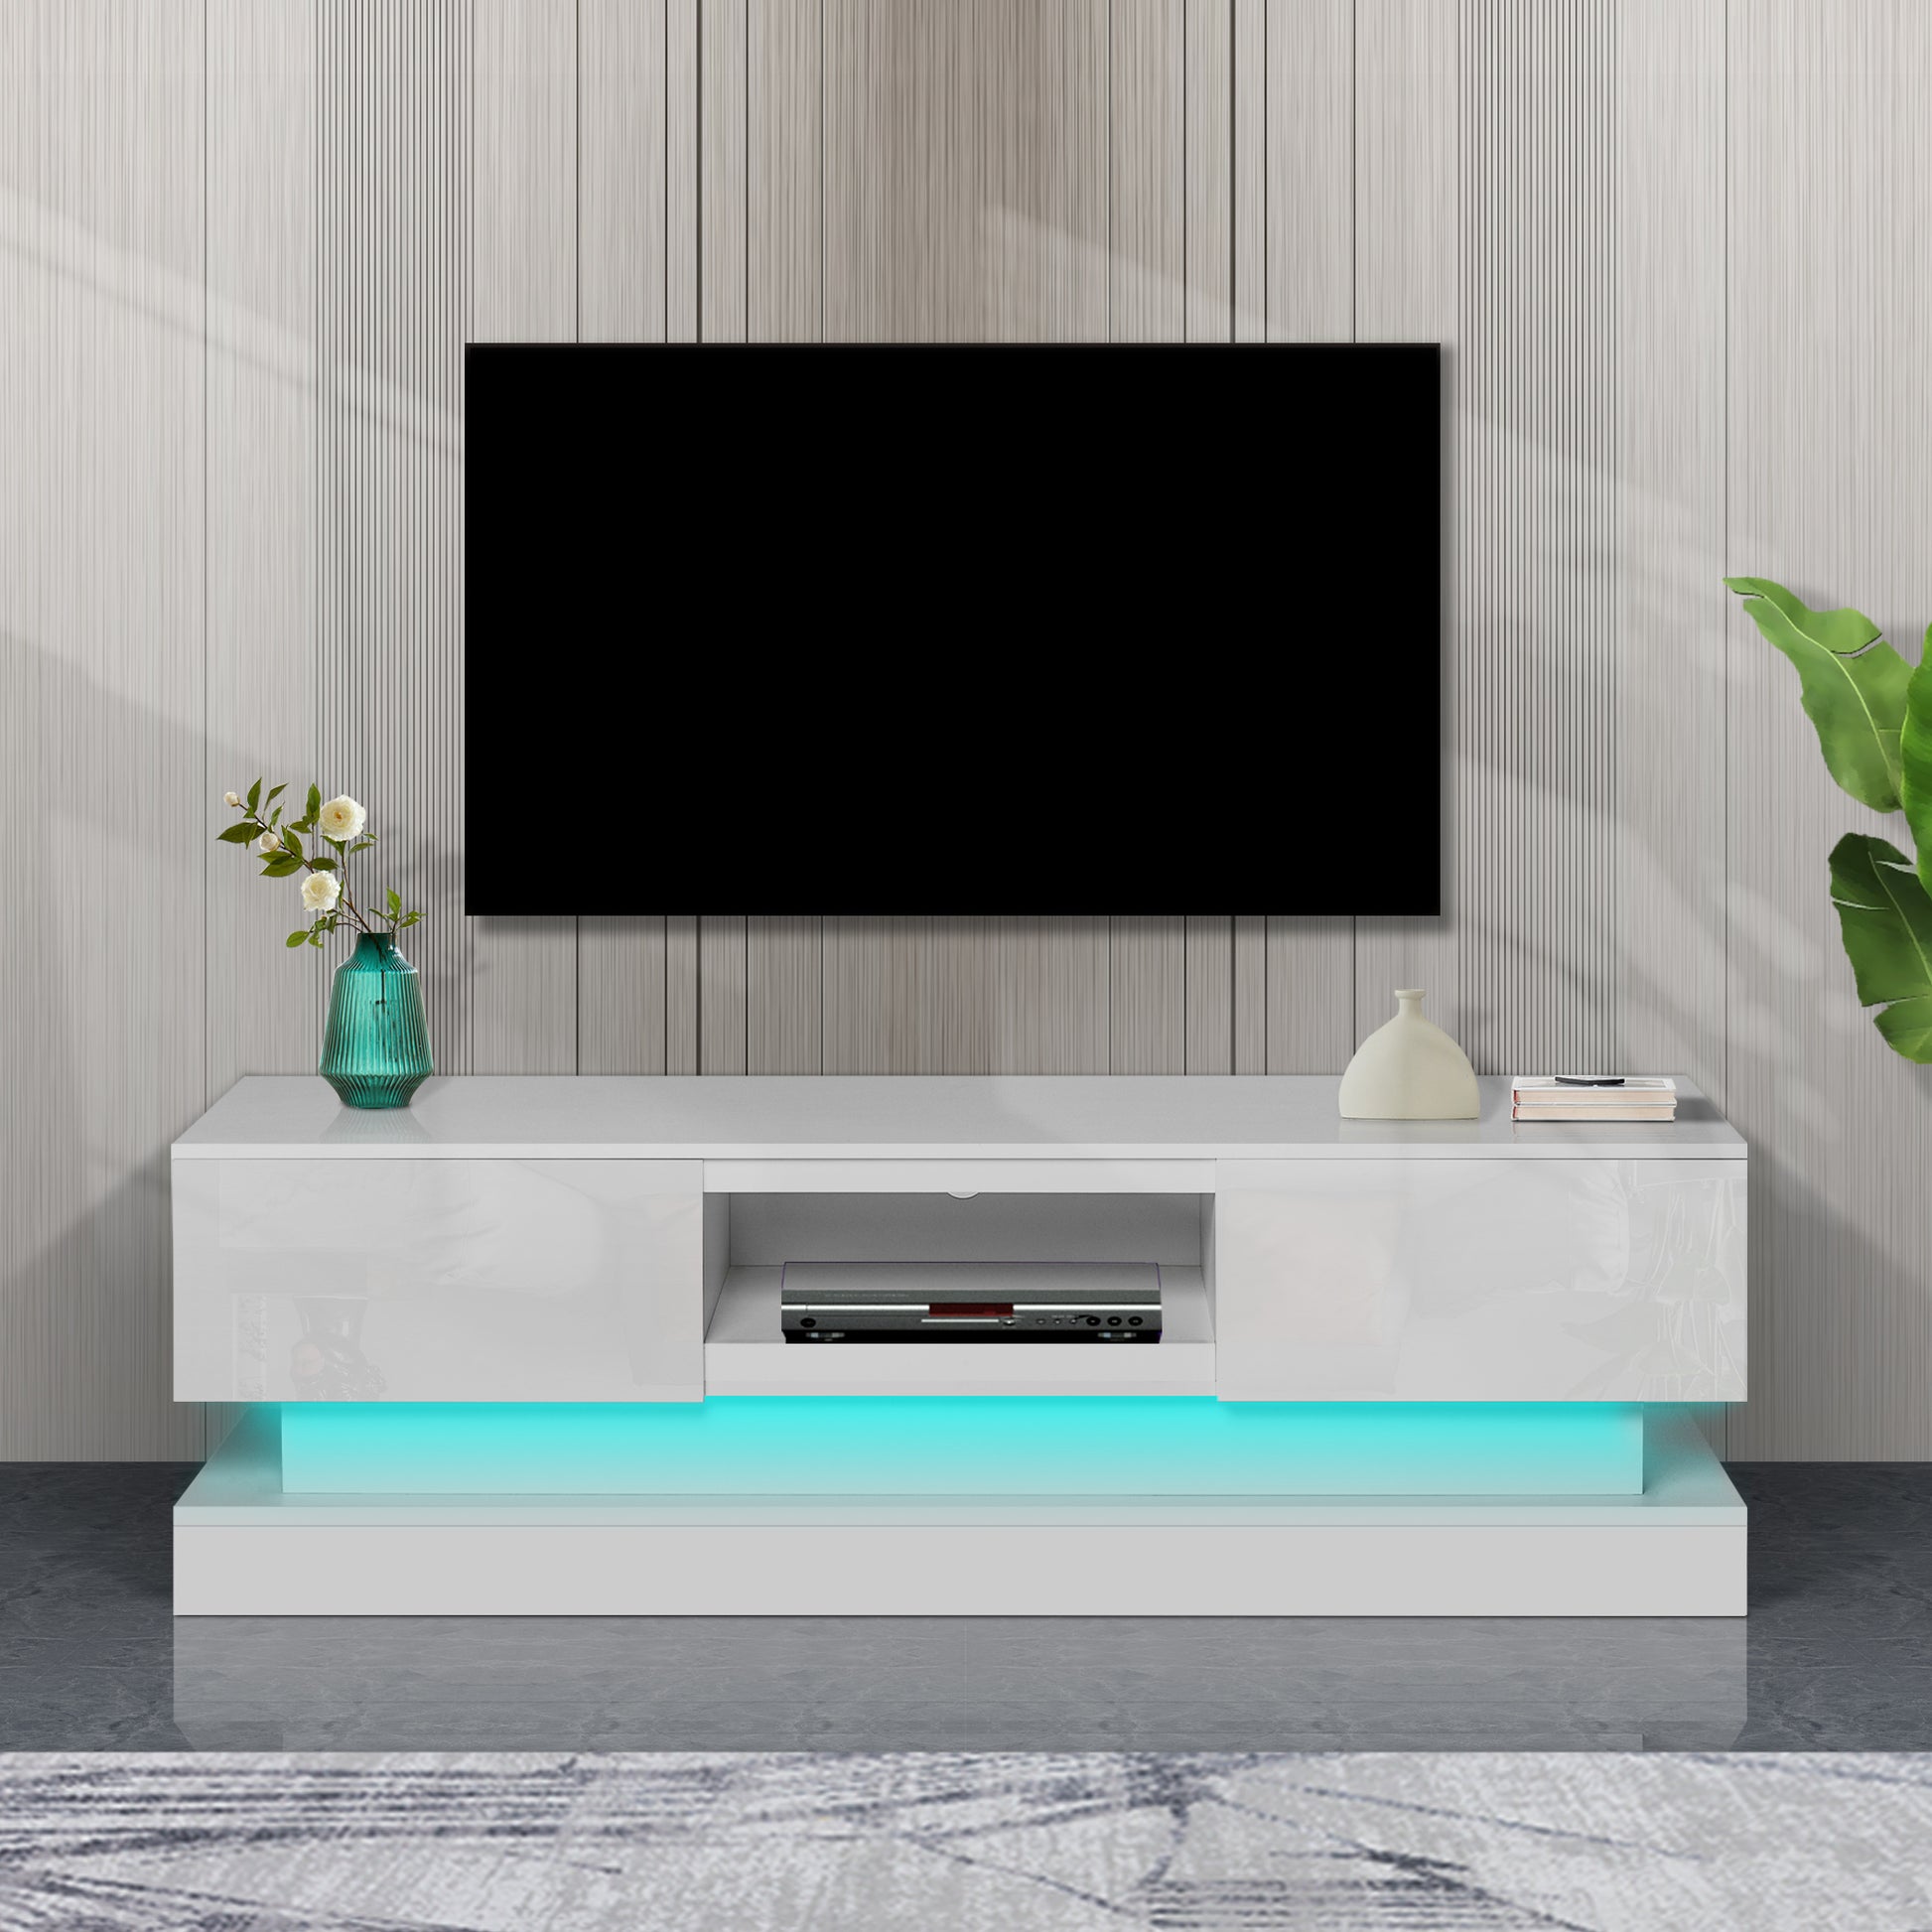 63inch  WHITE morden TV Stand with LED Lights,high glossy front TV Cabinet,can be assembled in Lounge Room, Living Room or Bedroom,color:WHITE - Enova Luxe Home Store